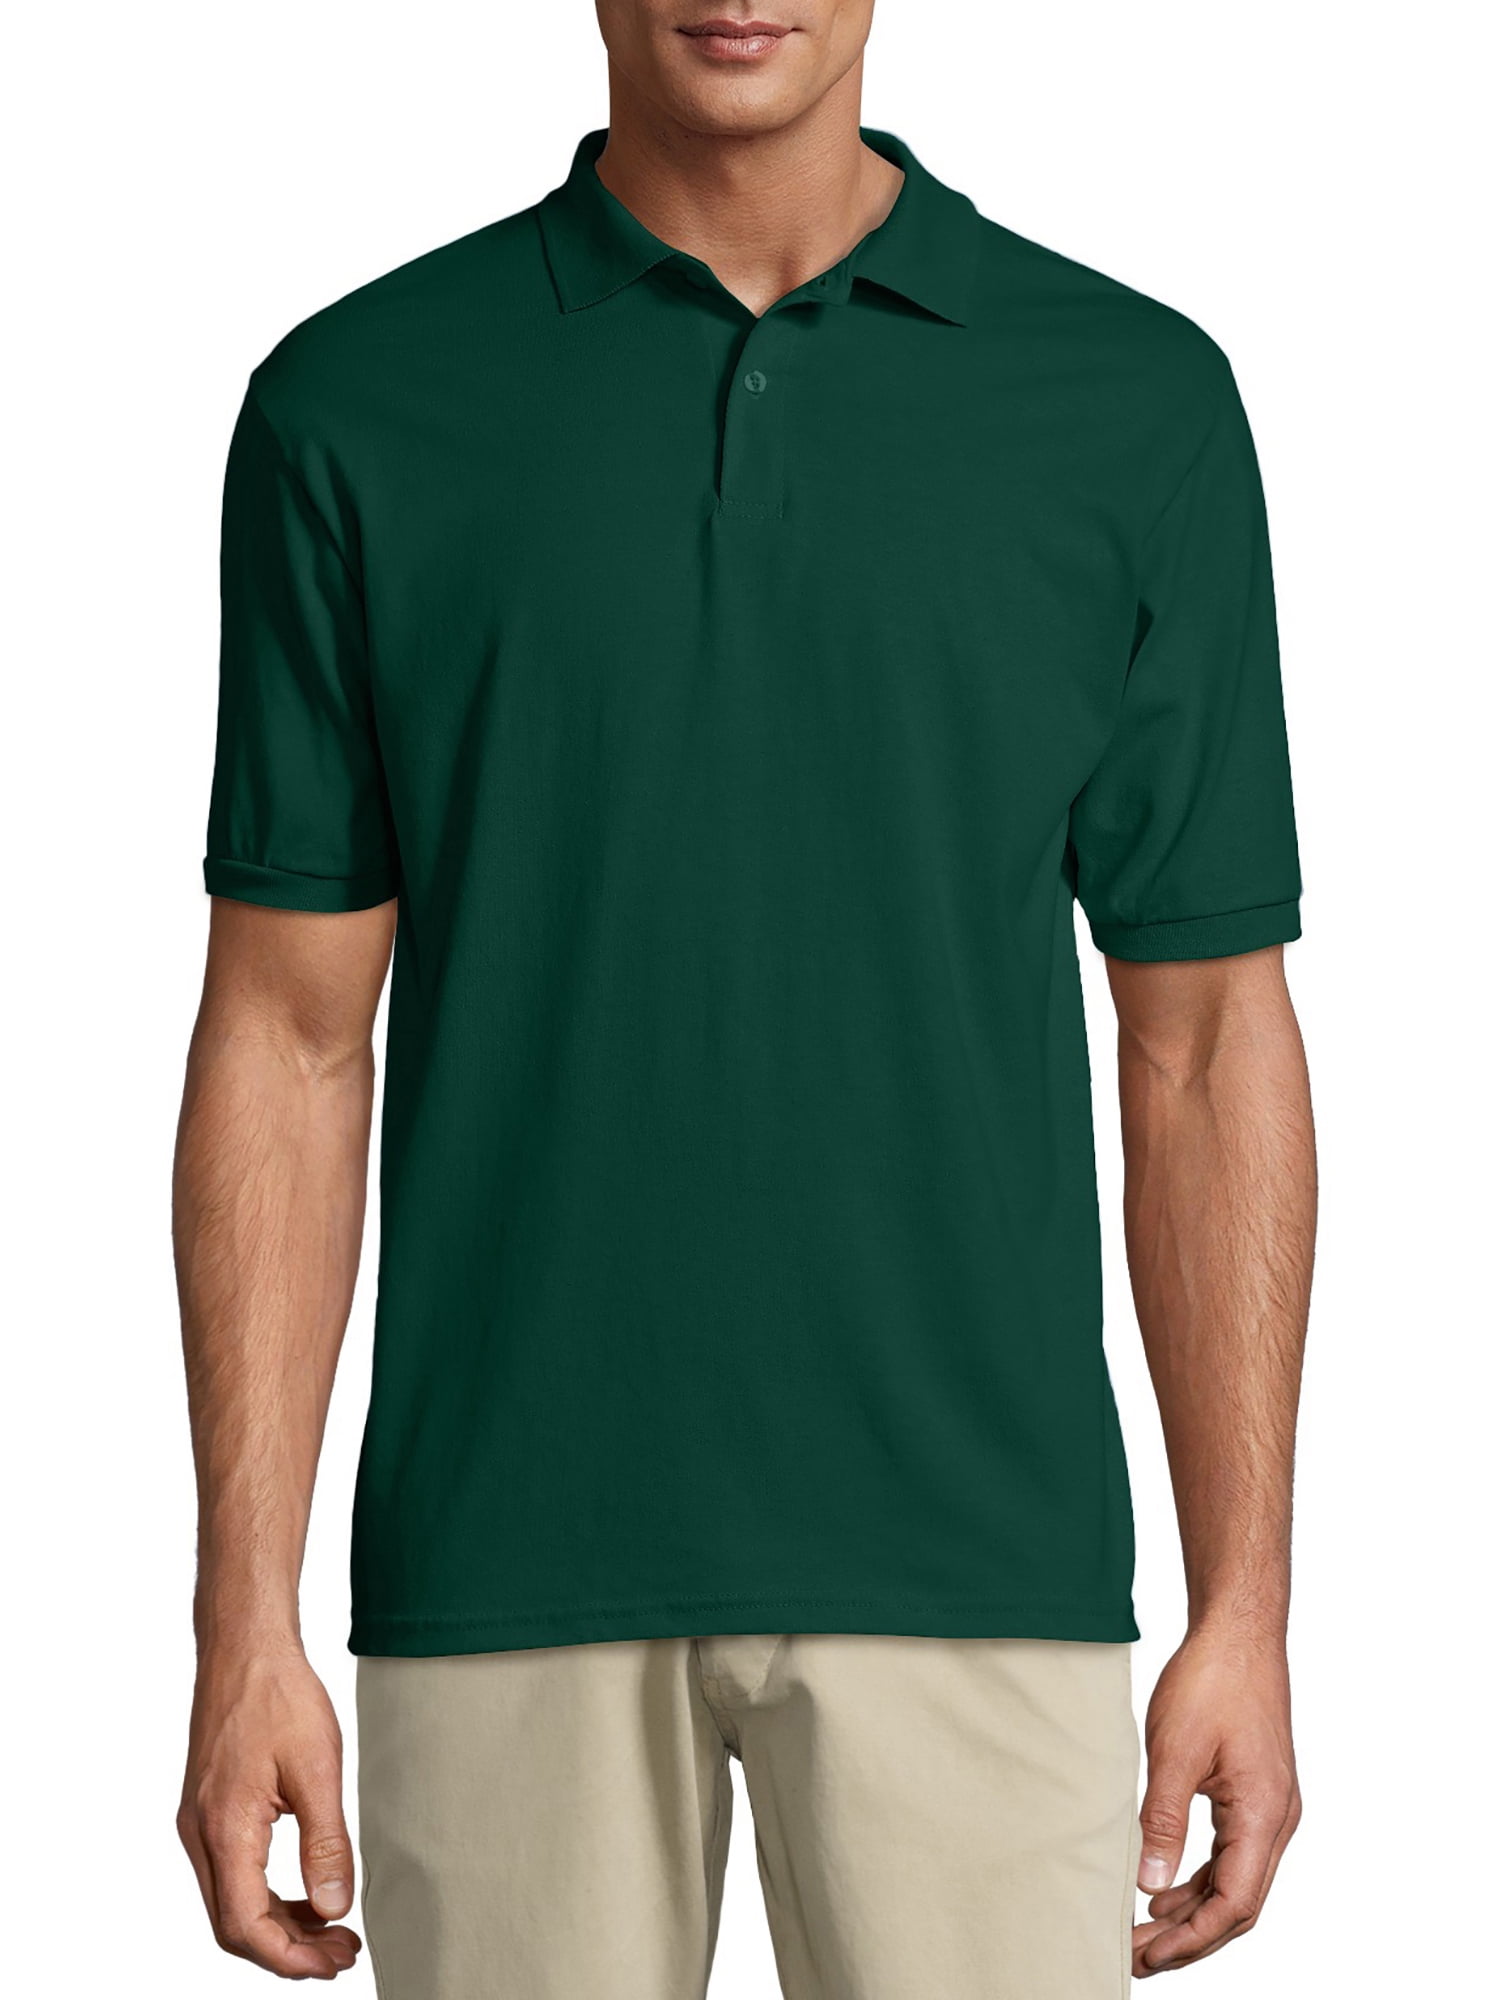 Buy > polo shirts at walmart > in stock